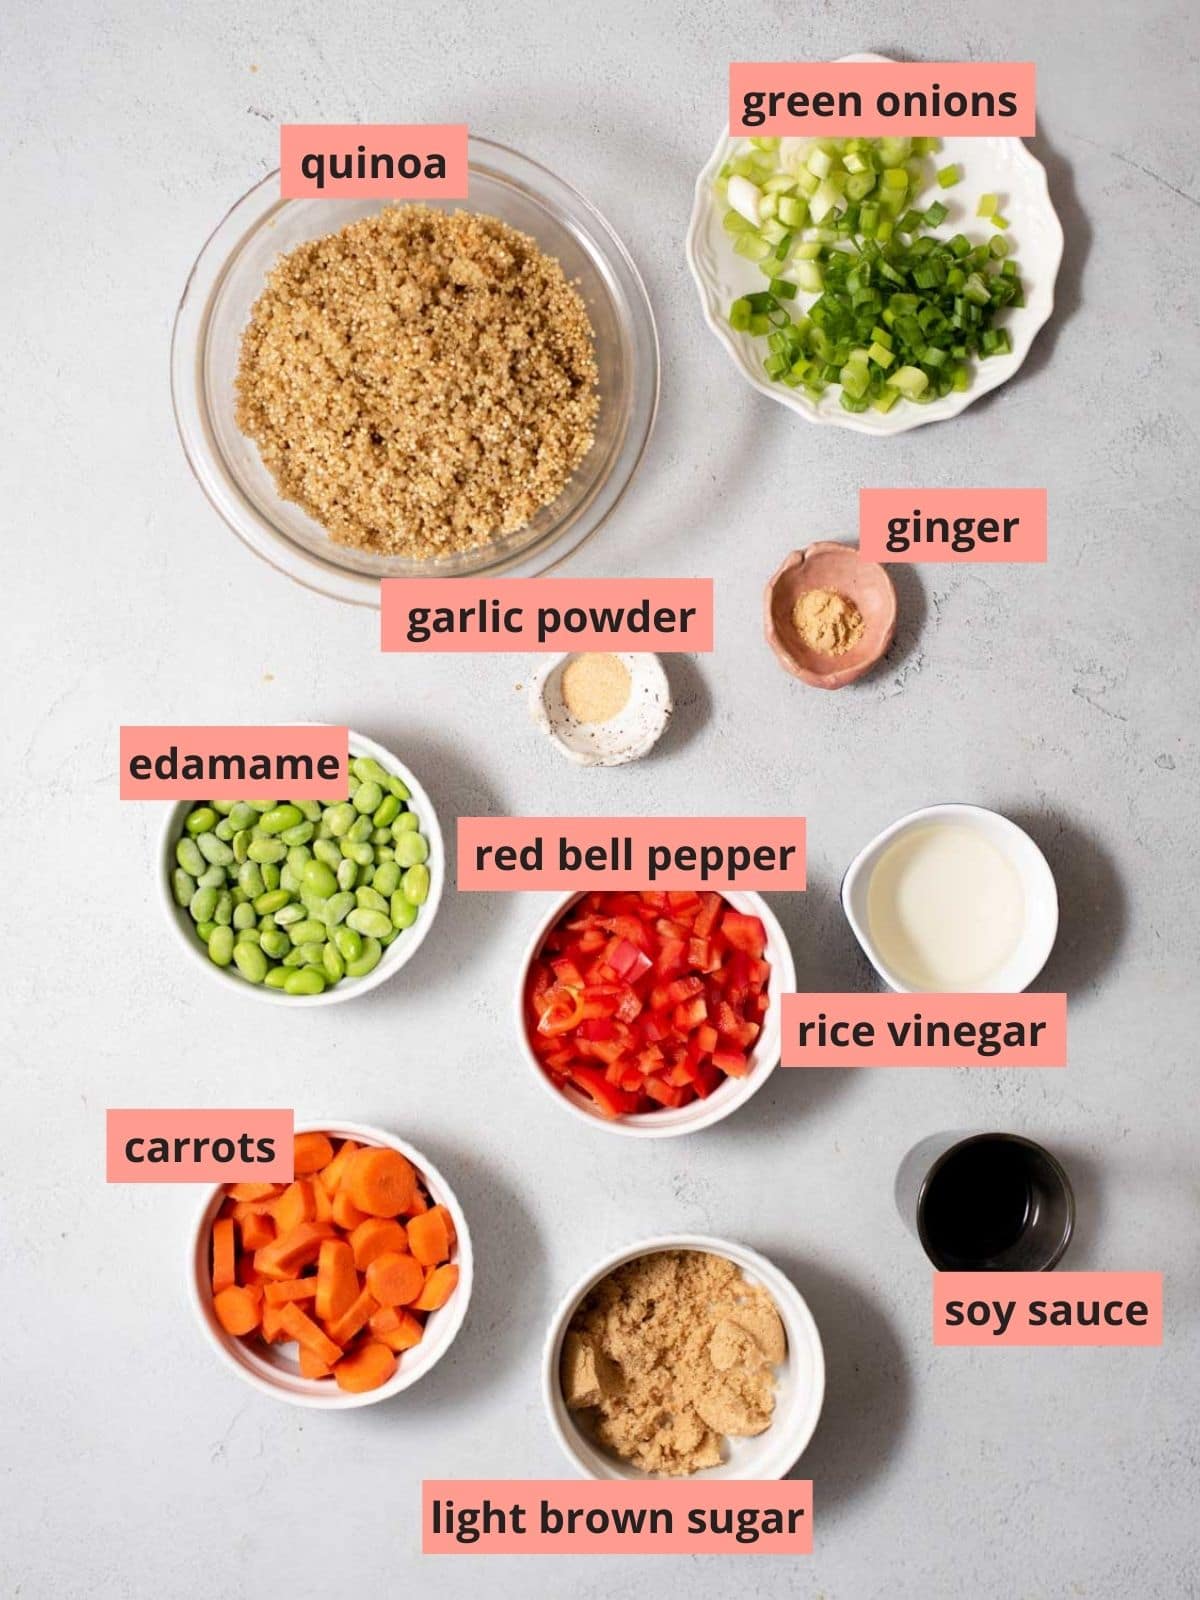 Labeled ingredients used to make quinoa fried rice